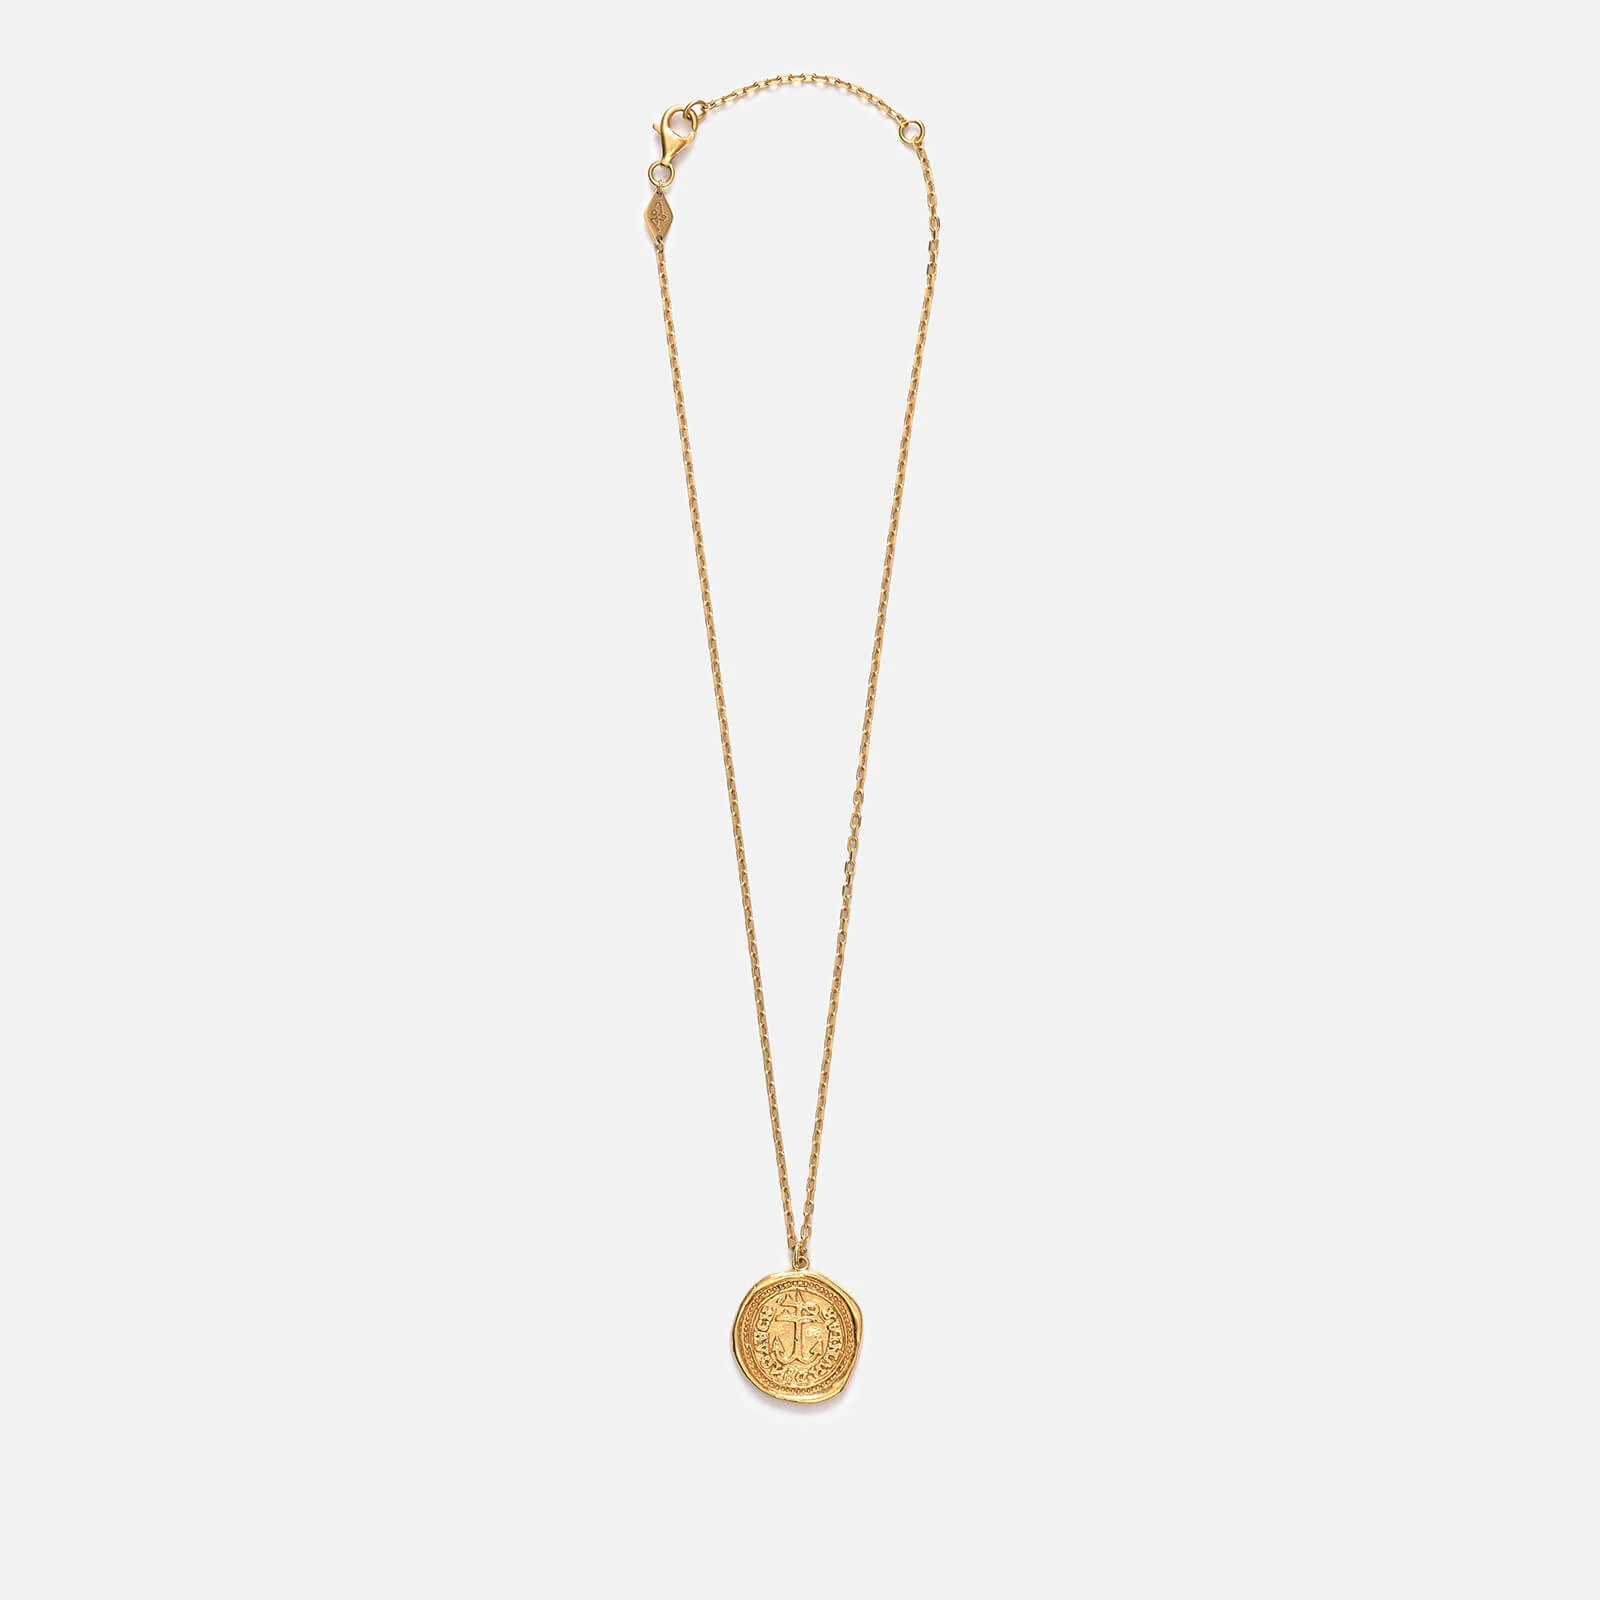 Anni Lu Women's My Anchor Necklace - Gold Image 1